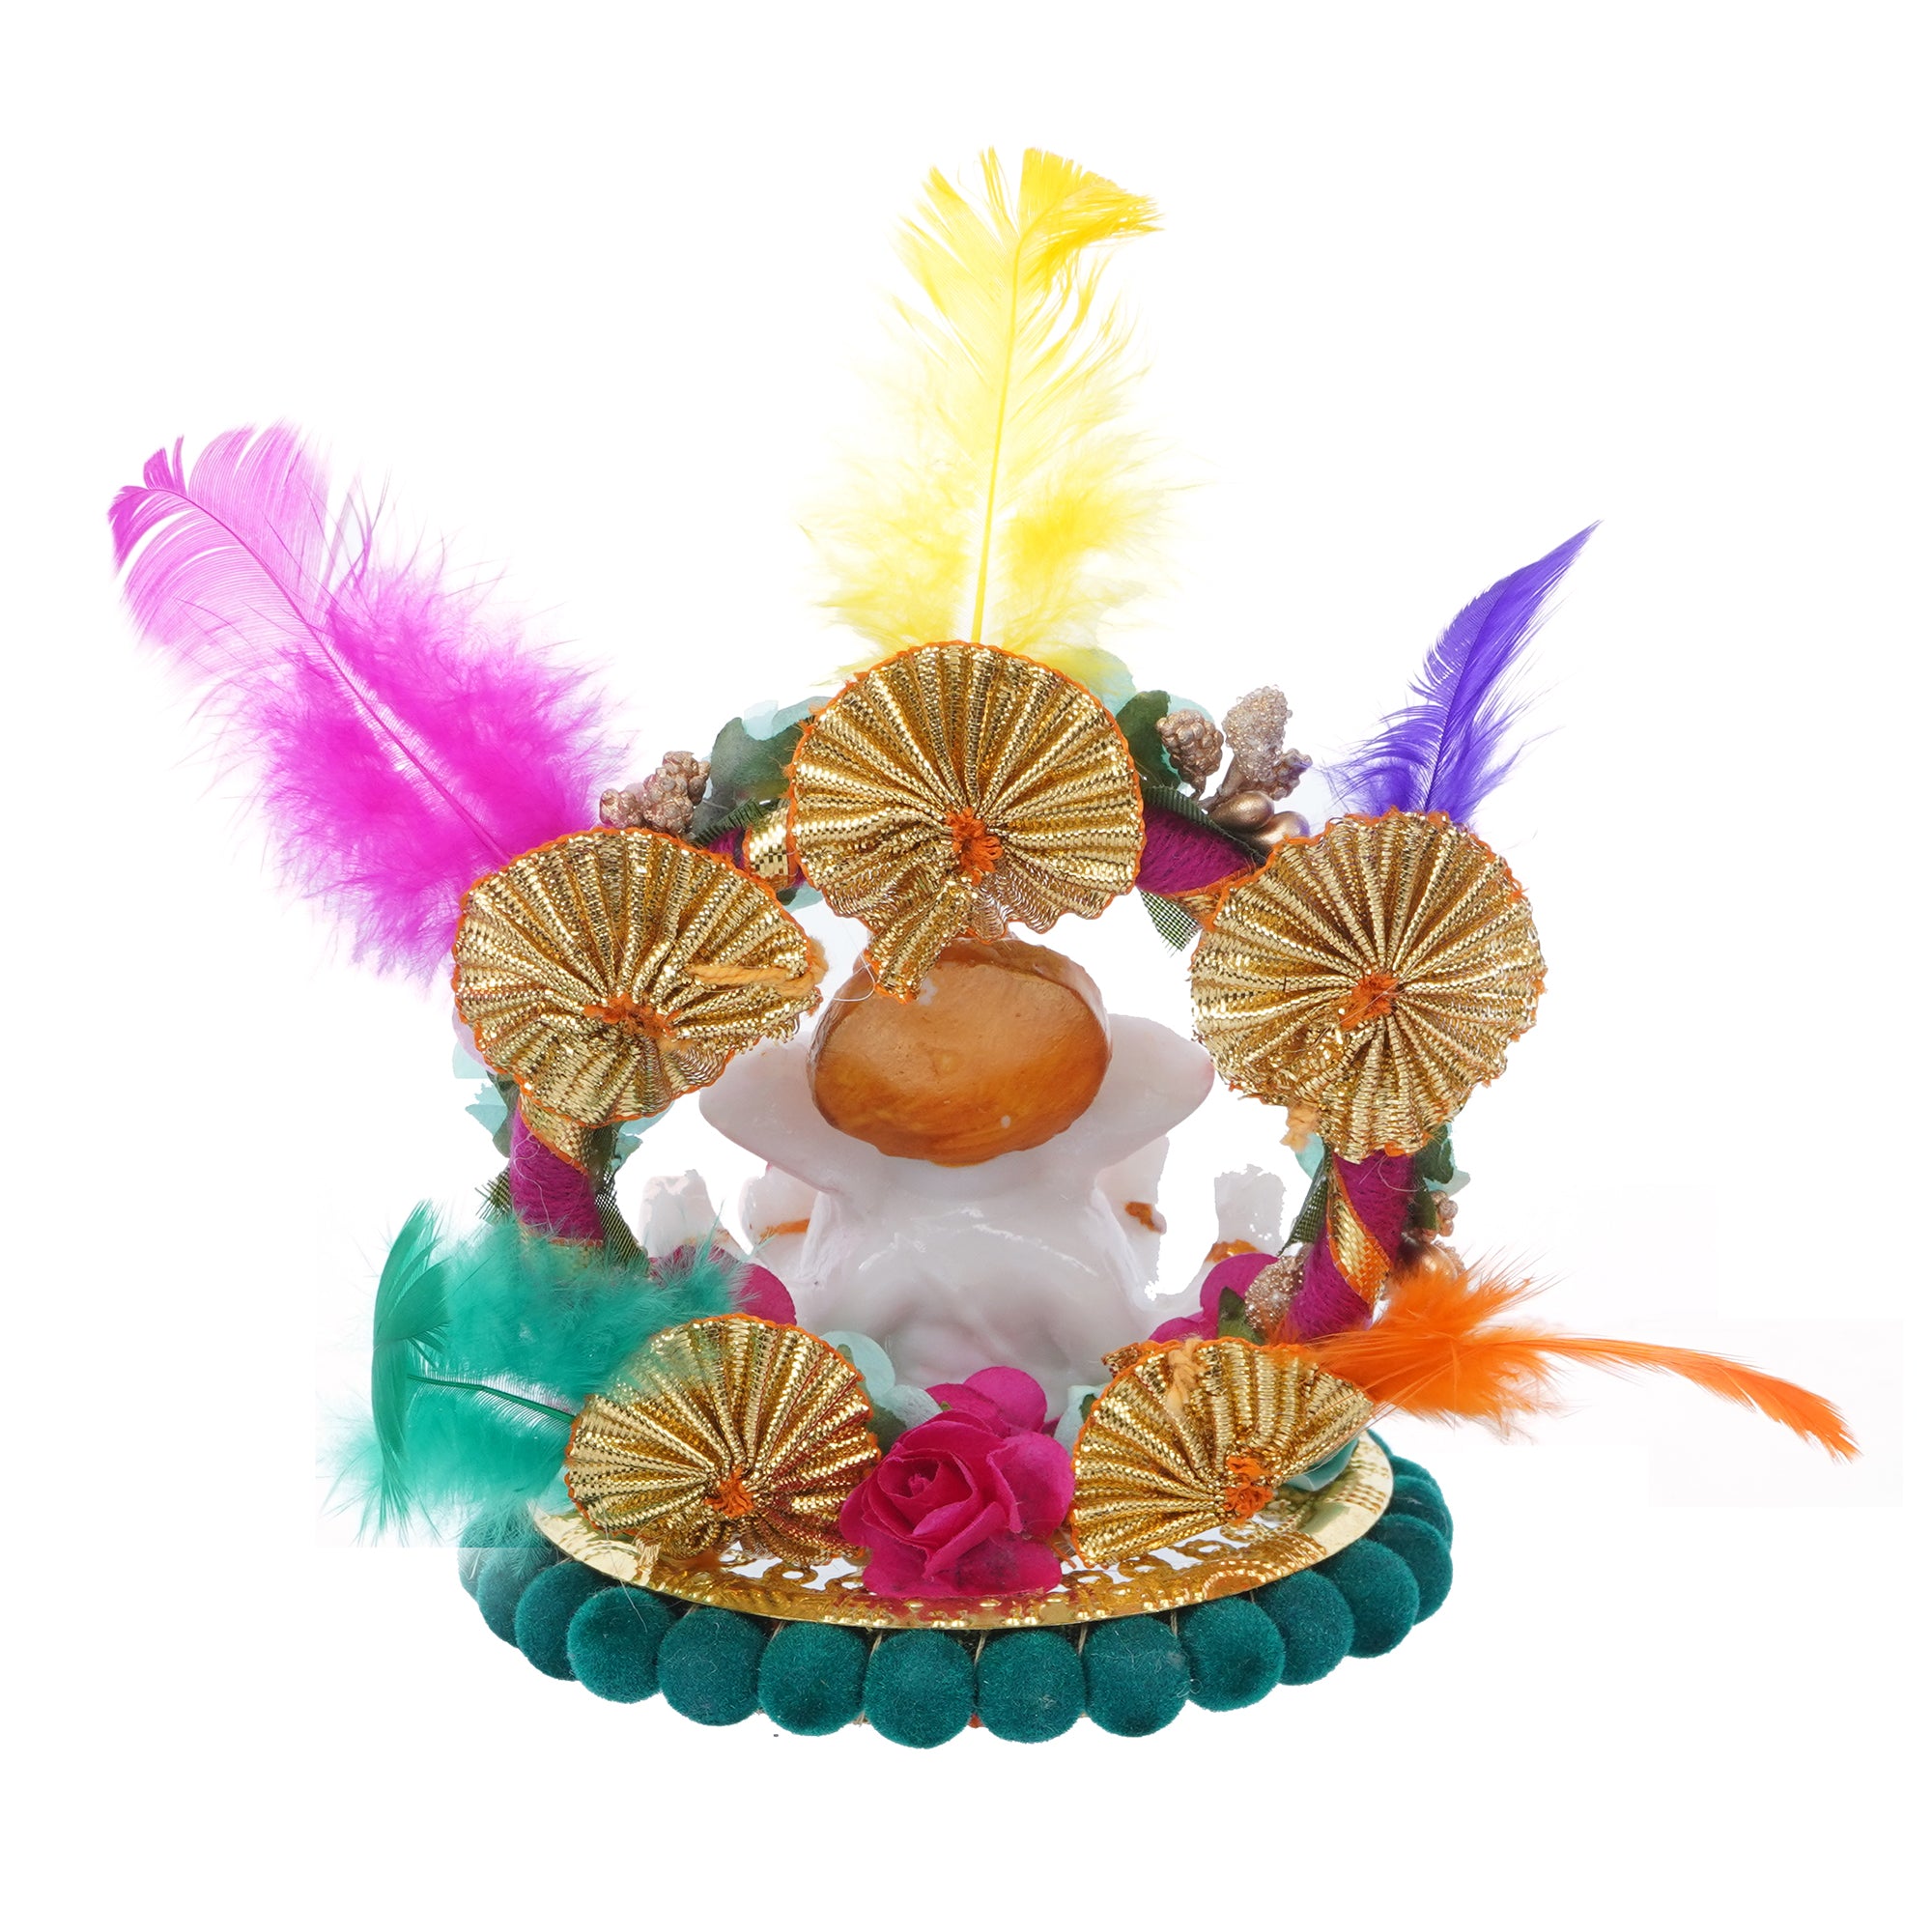 Lord Ganesha Idol On Decorative Handcrafted Plate With Throne Of Colorful Flowers And Feathers 6